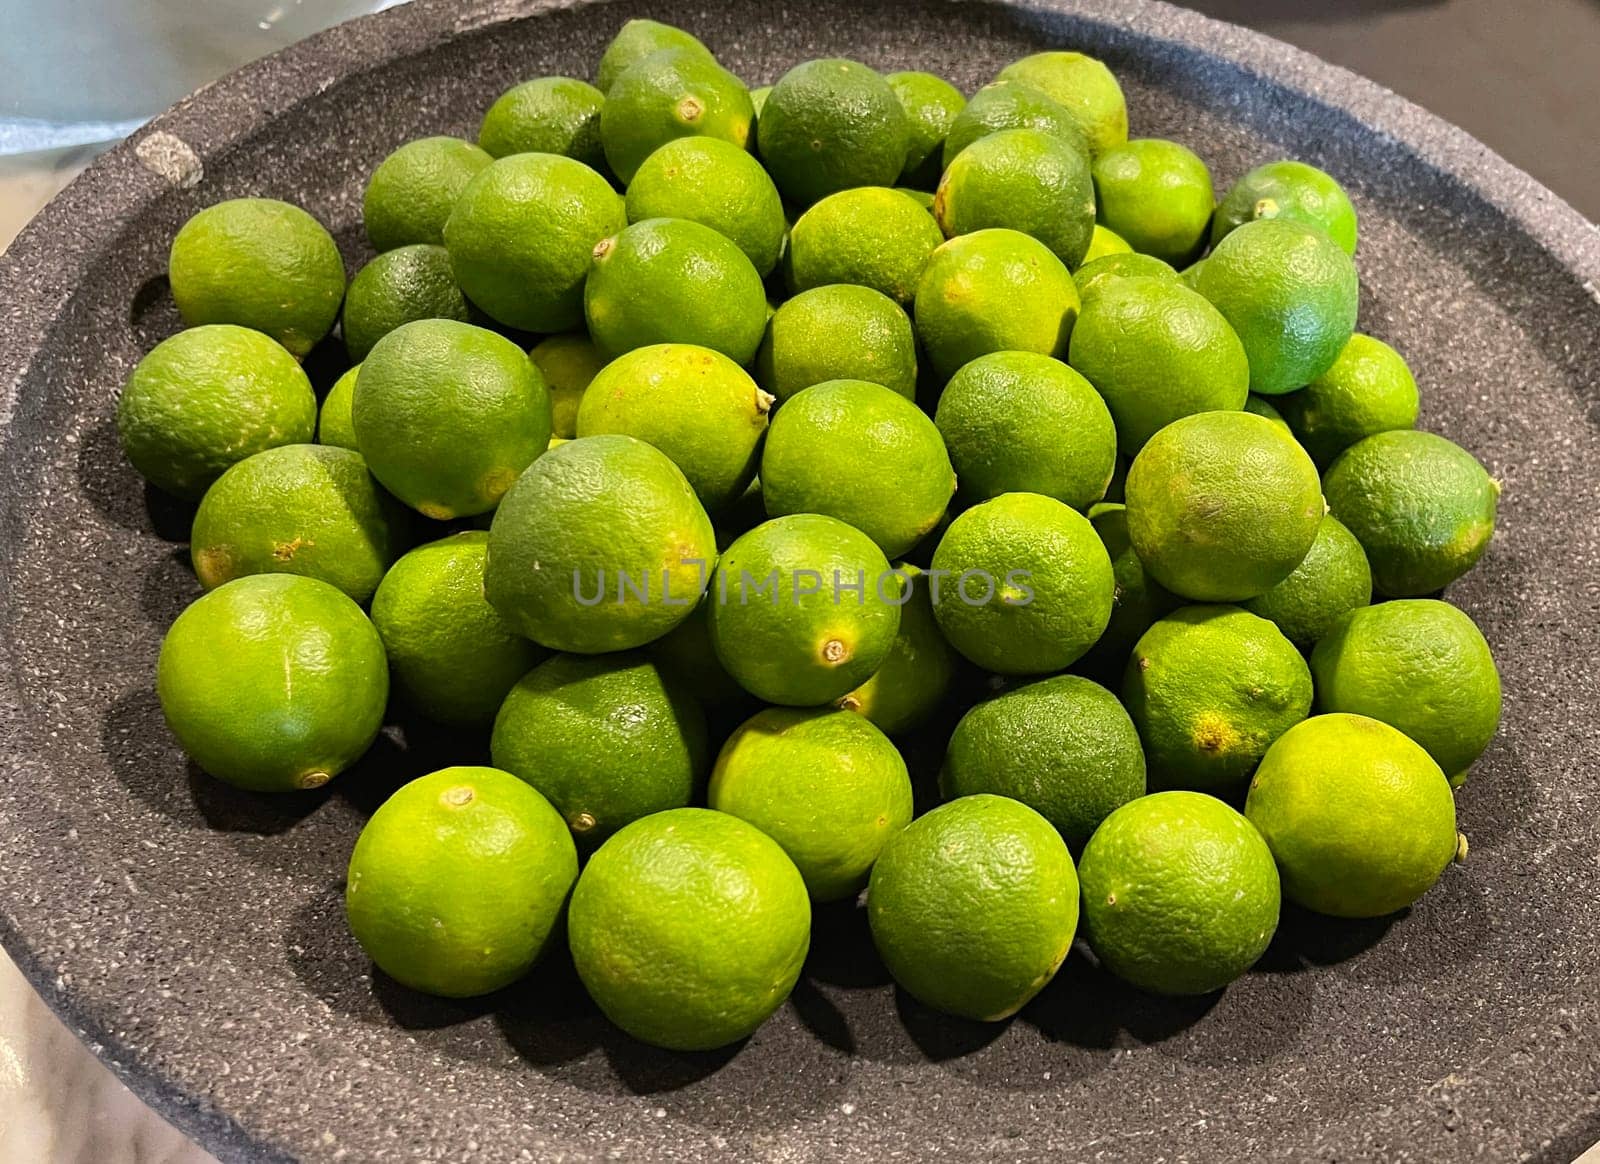 Lime Citrus Fruits In Fruit Market by antoksena